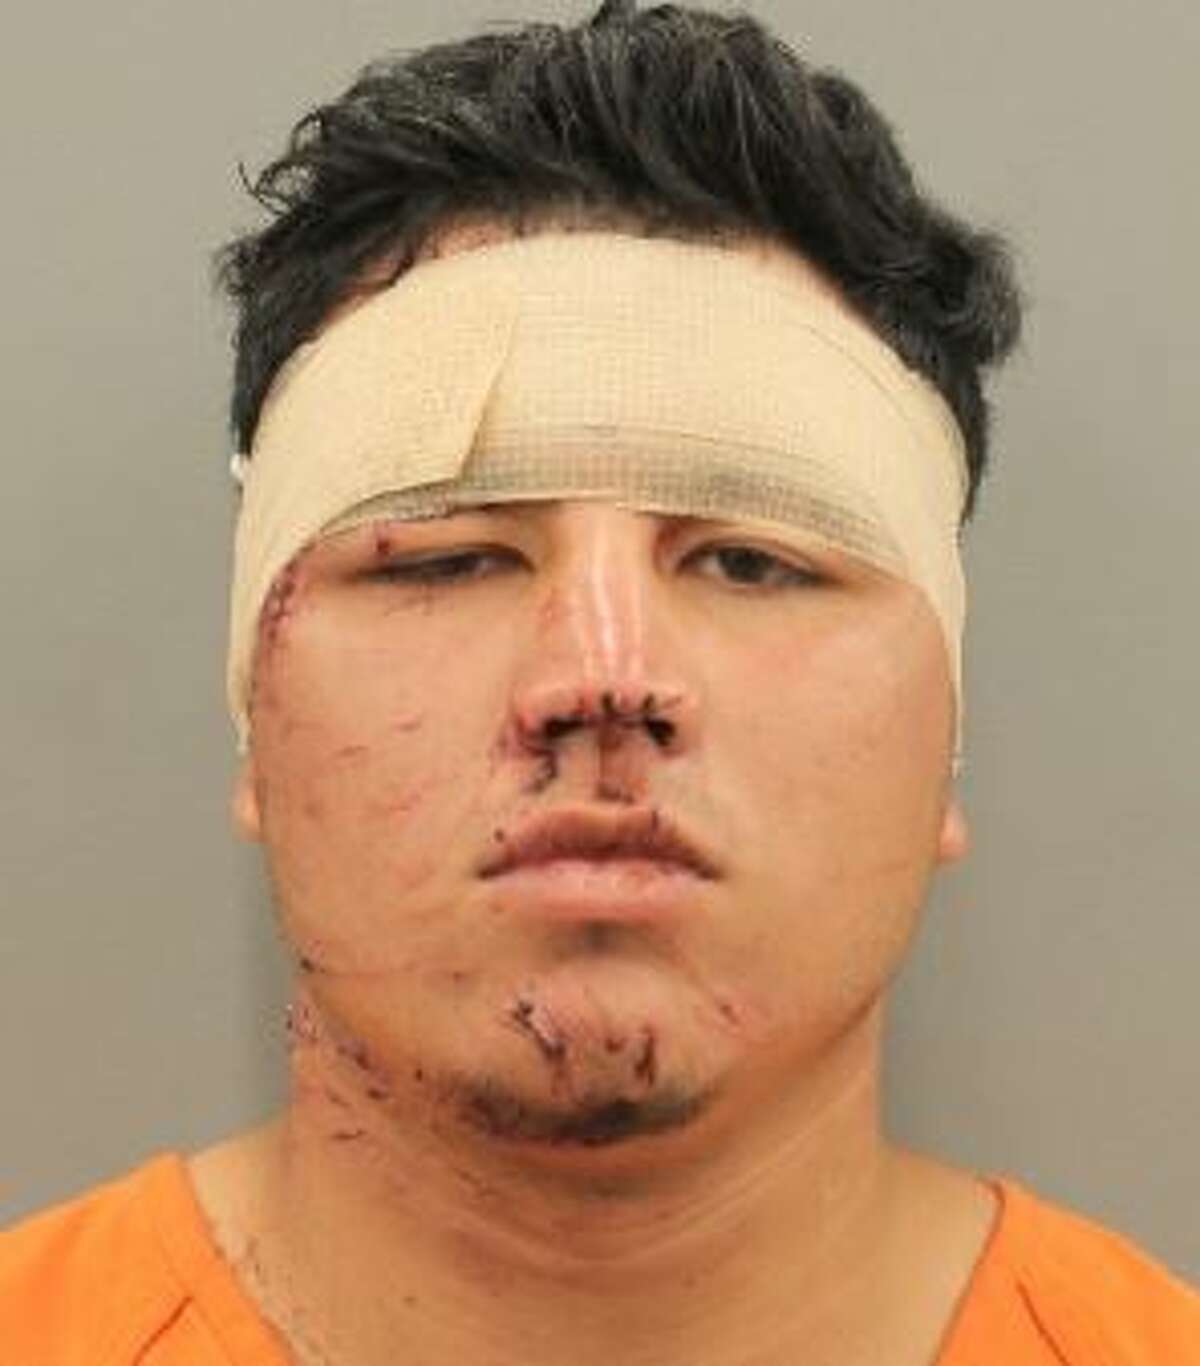 Gustavo Perez Alvarez, 19, was charged with intoxication manslaughter and failure to stop and render aid. See Harris County establishments fined for selling alcohol to minors in 2019 >>> 6.2.6